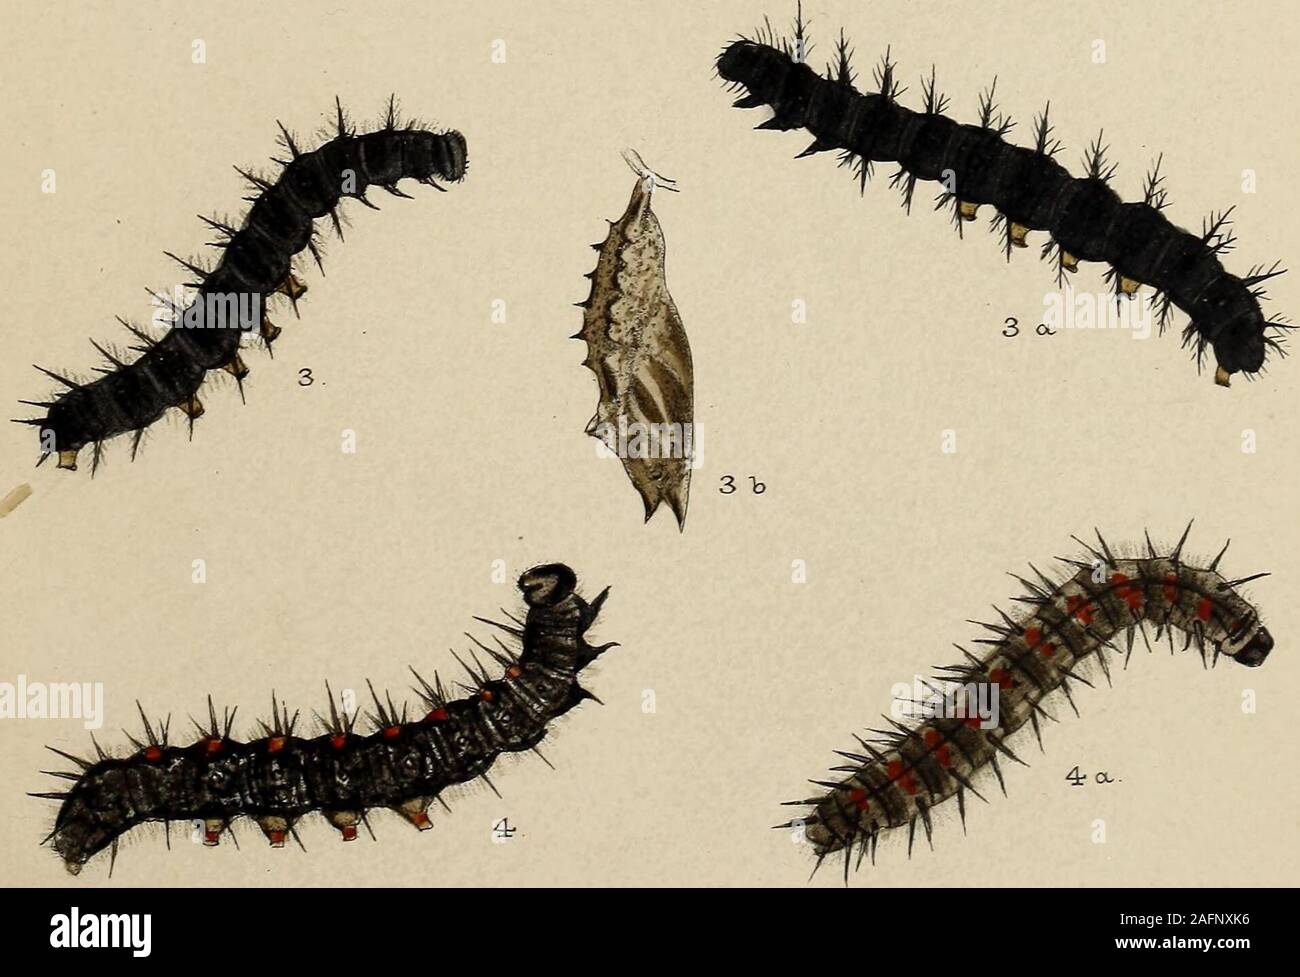 . The larvæ of the British butterflies and moths. T. C. Moore lith.. West ISTewniSua. &C° ixap- W.BUCKLER dUL. PLATE IX. Vanessa polychloros. 1 c, larva after third moult; 1, 1 a9 1 b, after fourthmoult; 1 d, pupa. See pp. 54, 55. Vanessa tjrtigm. 2, yellow variety of larva; 2 a, 2 b, other larvae, allnearly full grown; 2 c, pupa. See pp. 55—57 and p. 181. GrRAPTA O-ALBUM. 3, 3 a, 3 b, full-grown larva; 3 c, pupa. See pp. 57, 58, and pp. 182—184 Plate IX. Stock Photo